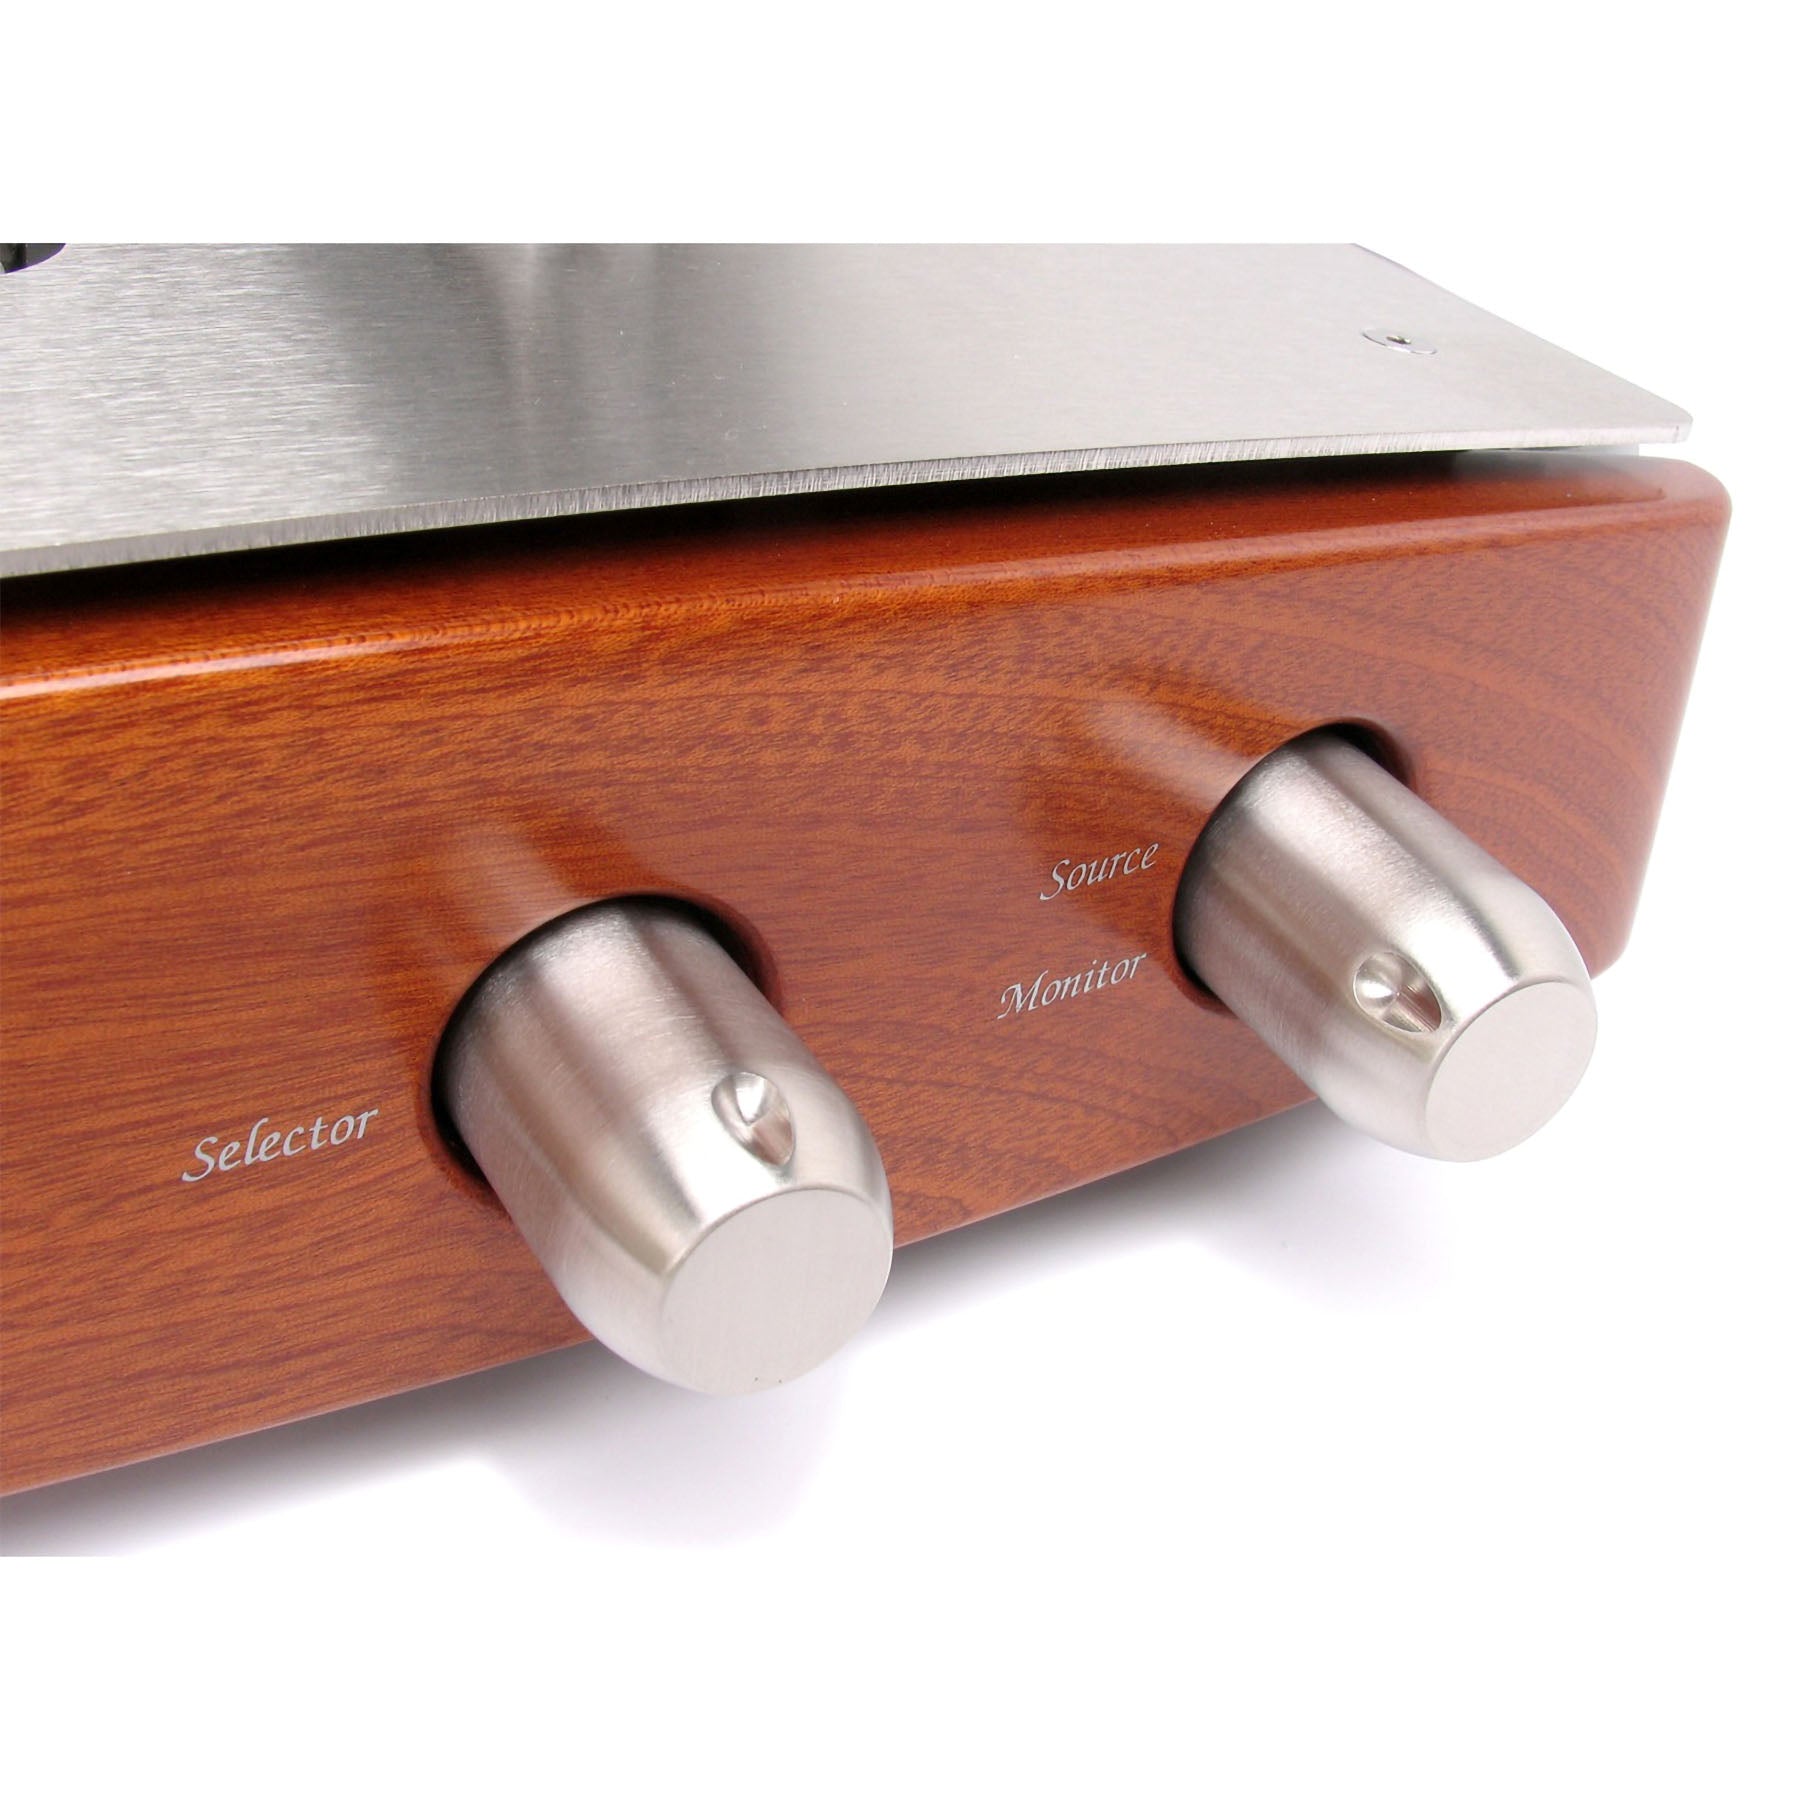 Unison Research Sinfonia Integrated Amplifier